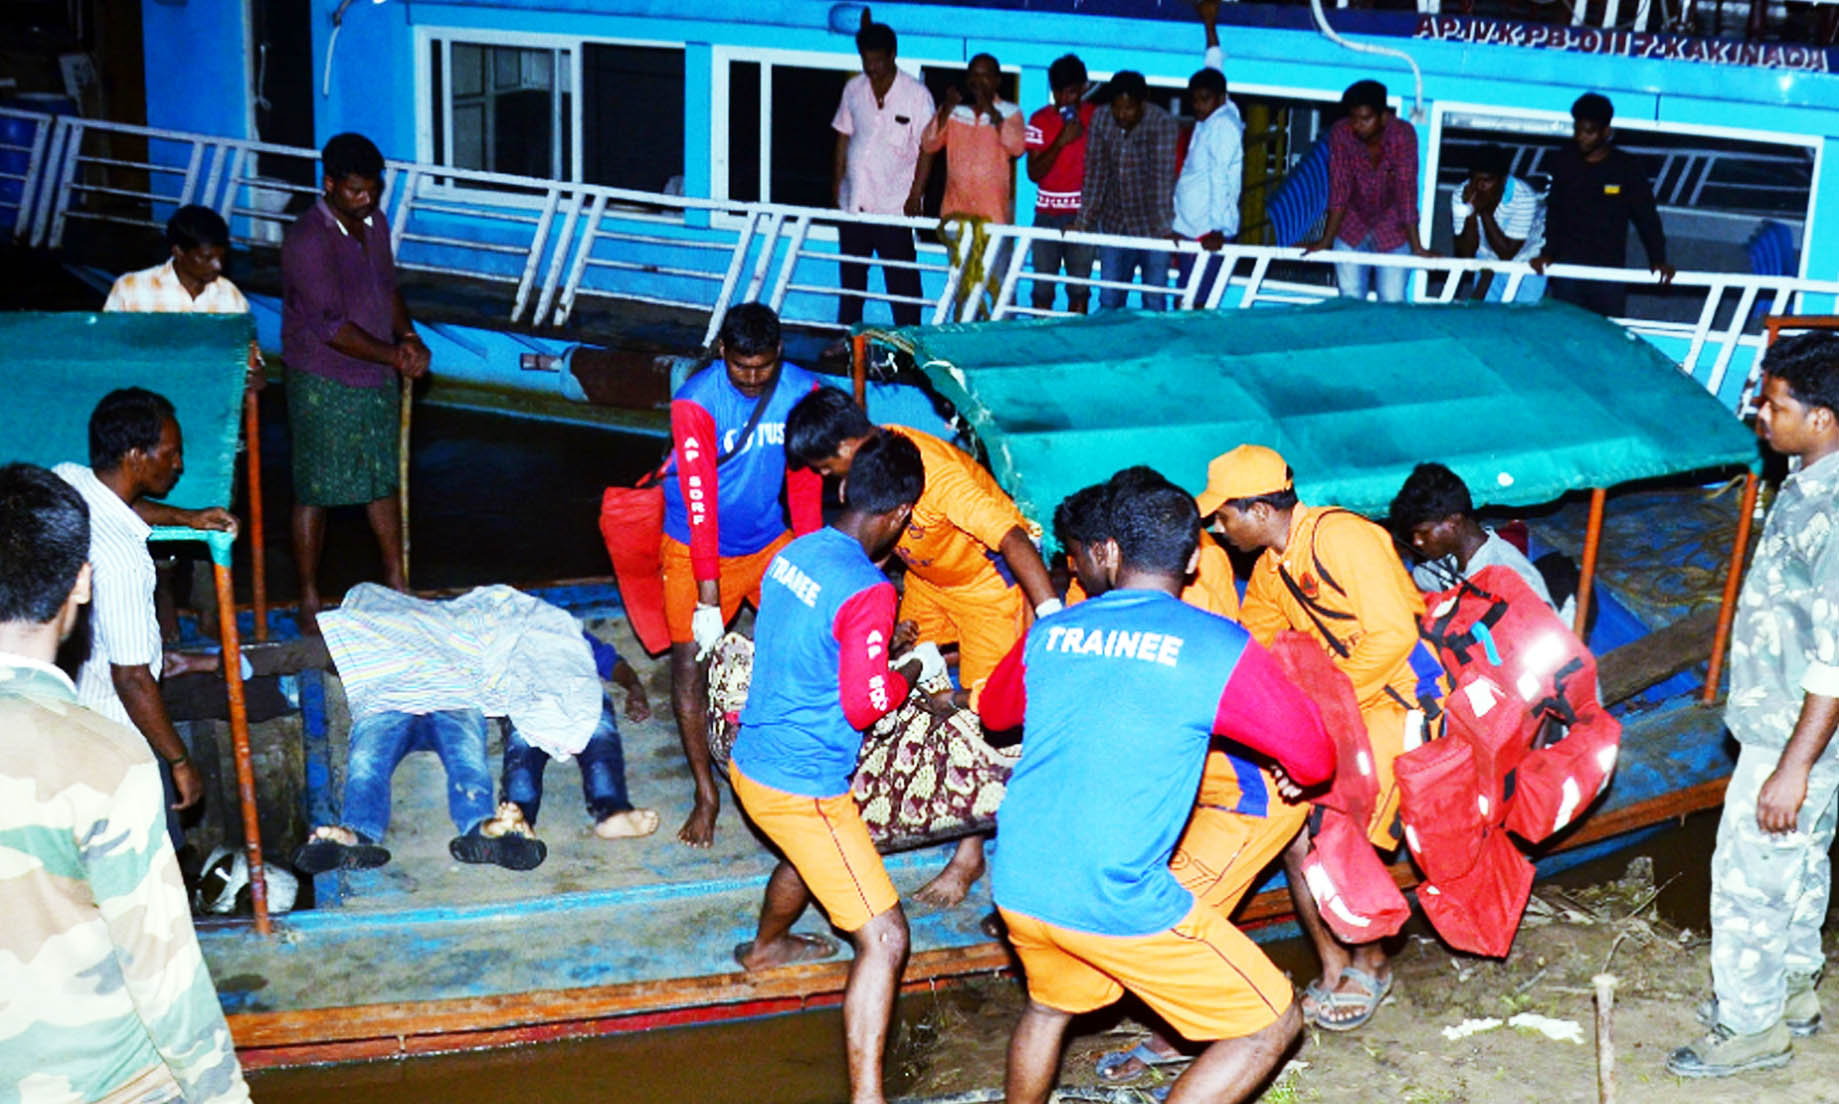 Andhra Pradesh boat capsize: 8 Drown, 26 Missing After Andhra Tourist Boat Capsizes